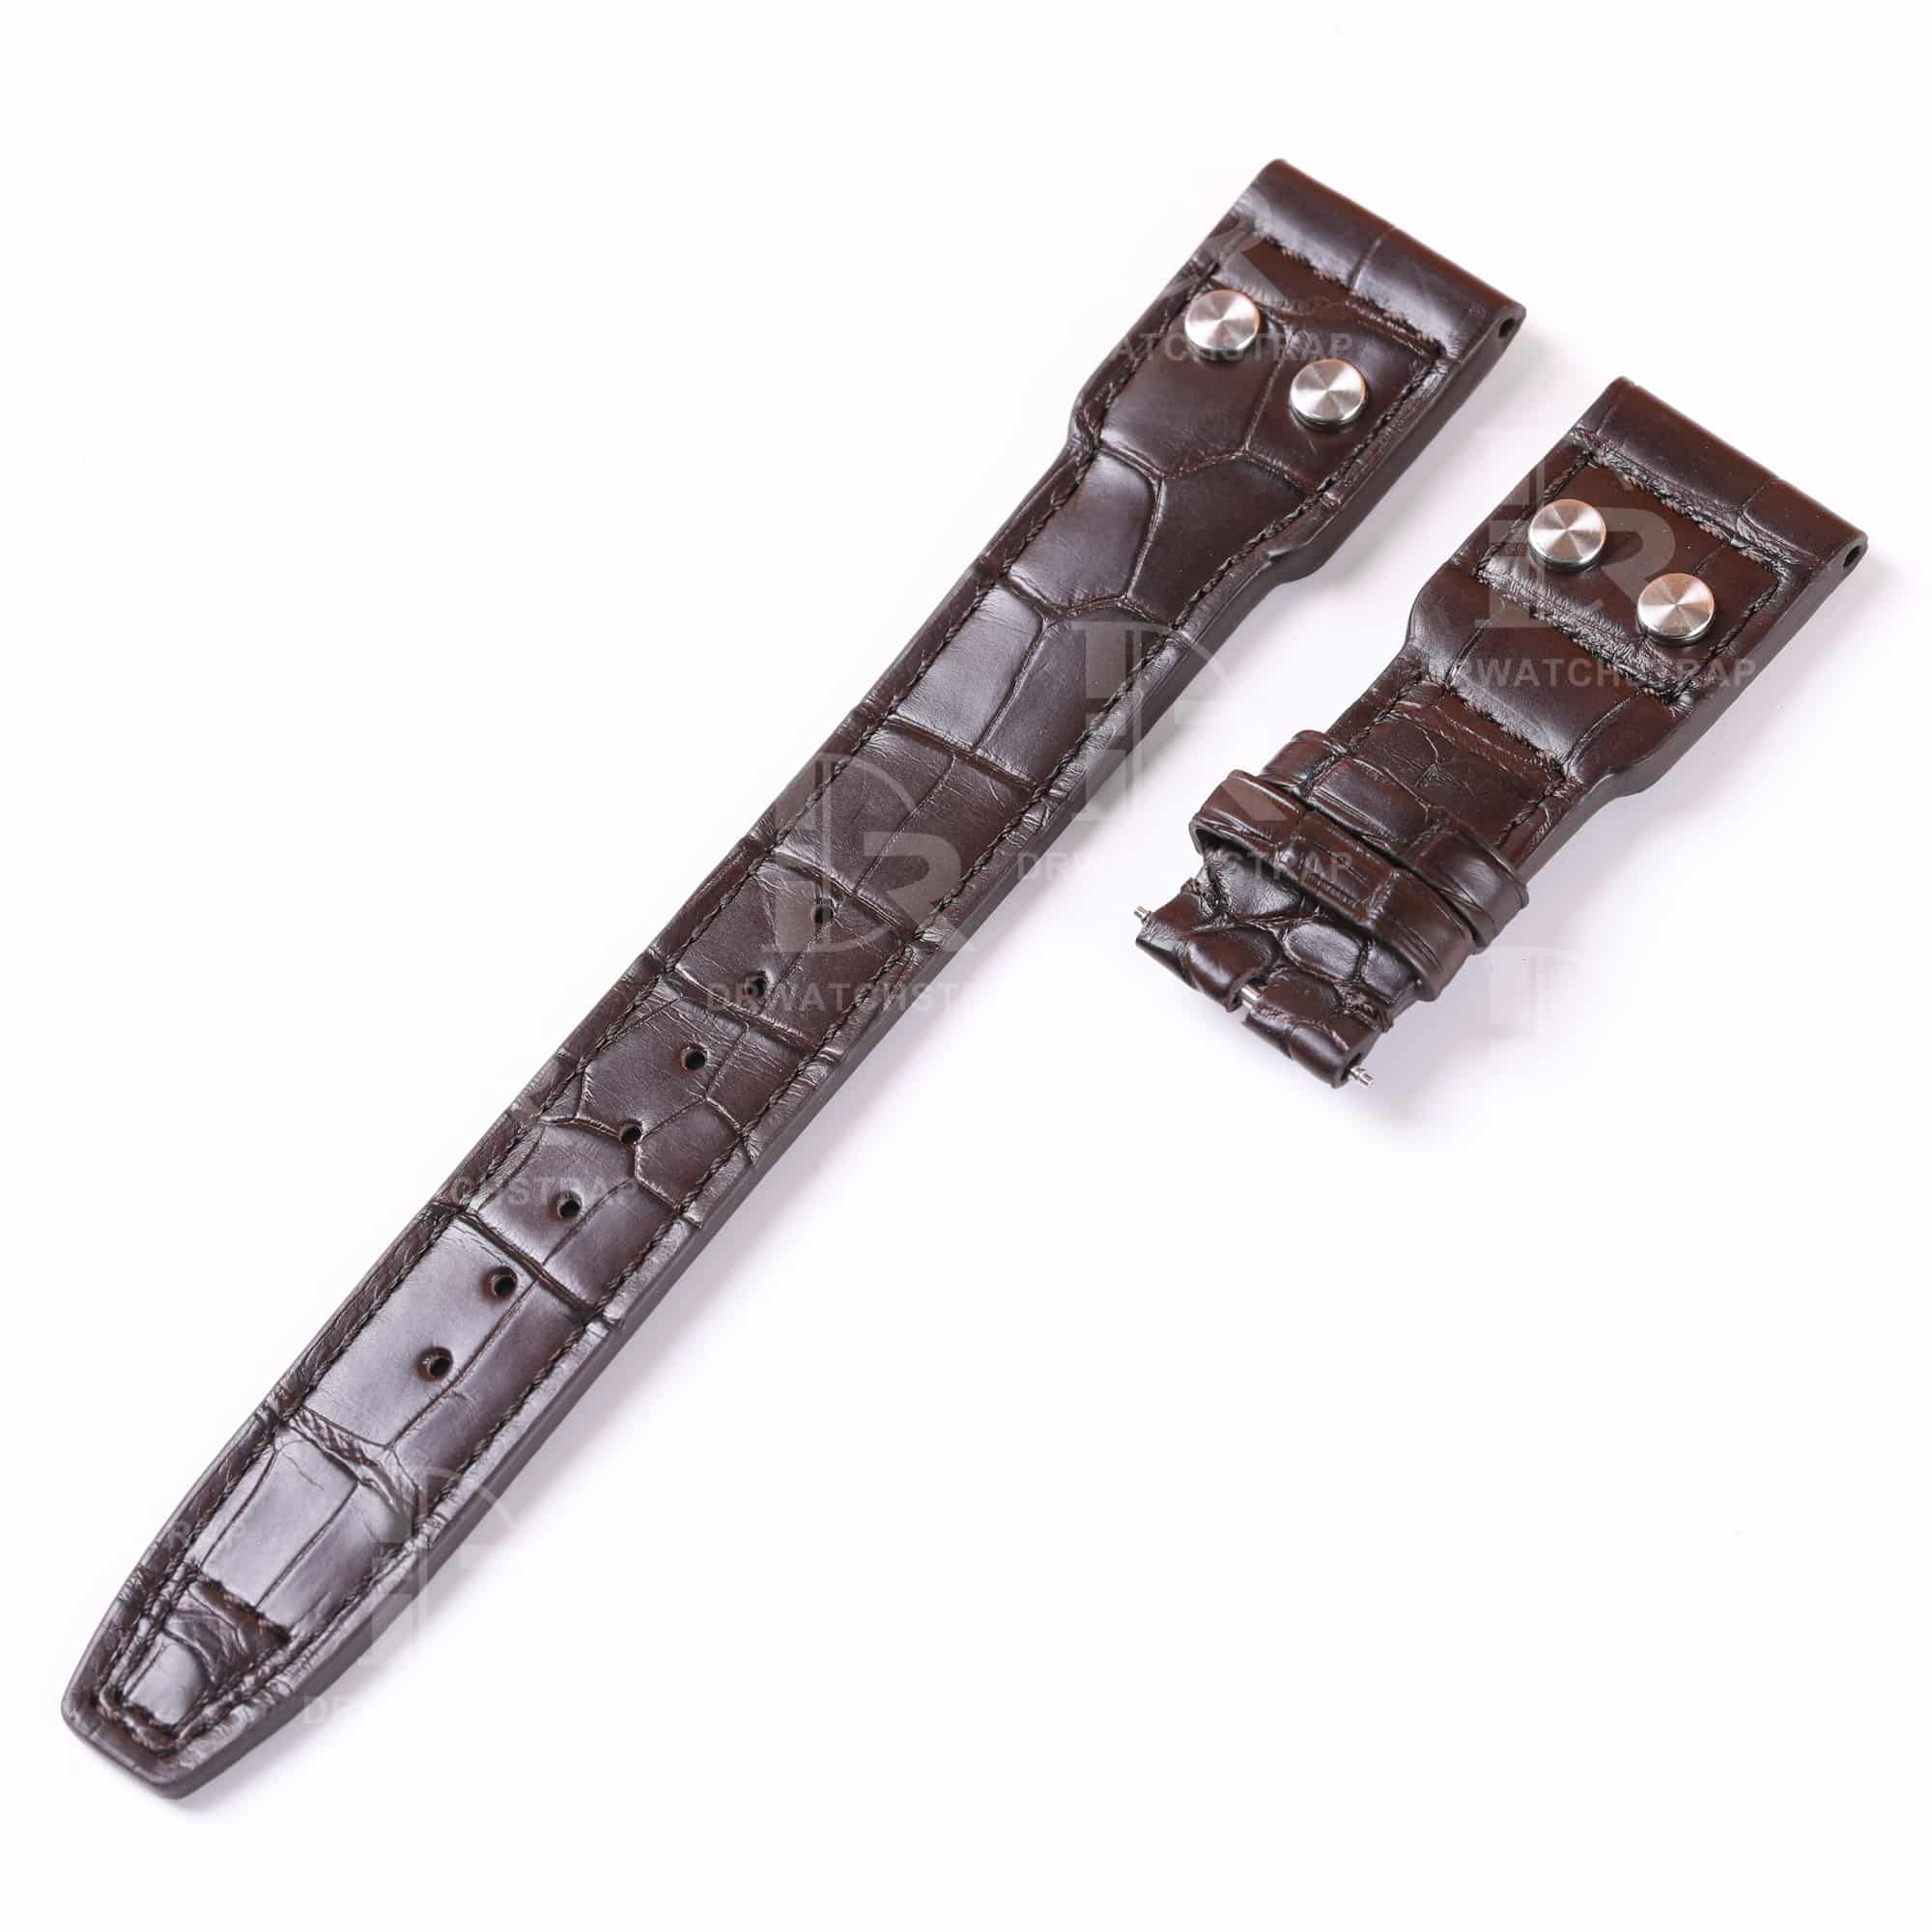 Custom alligator chocolate brown leather watch band with rivets 22mm replacement IWC Pilot watch strap